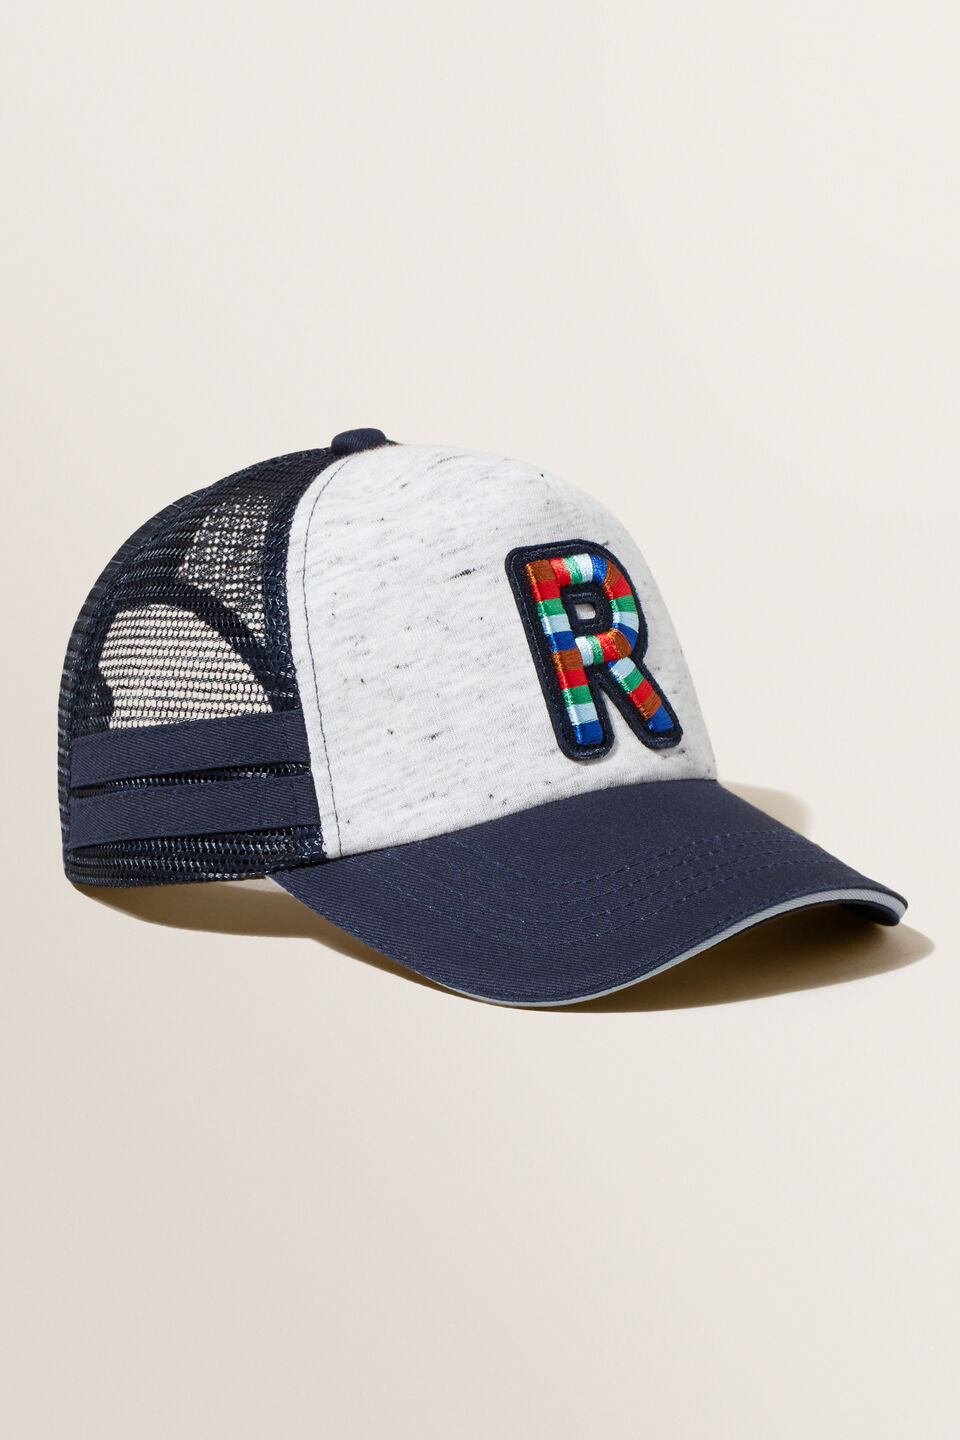 Embroidered Initial Cap  R